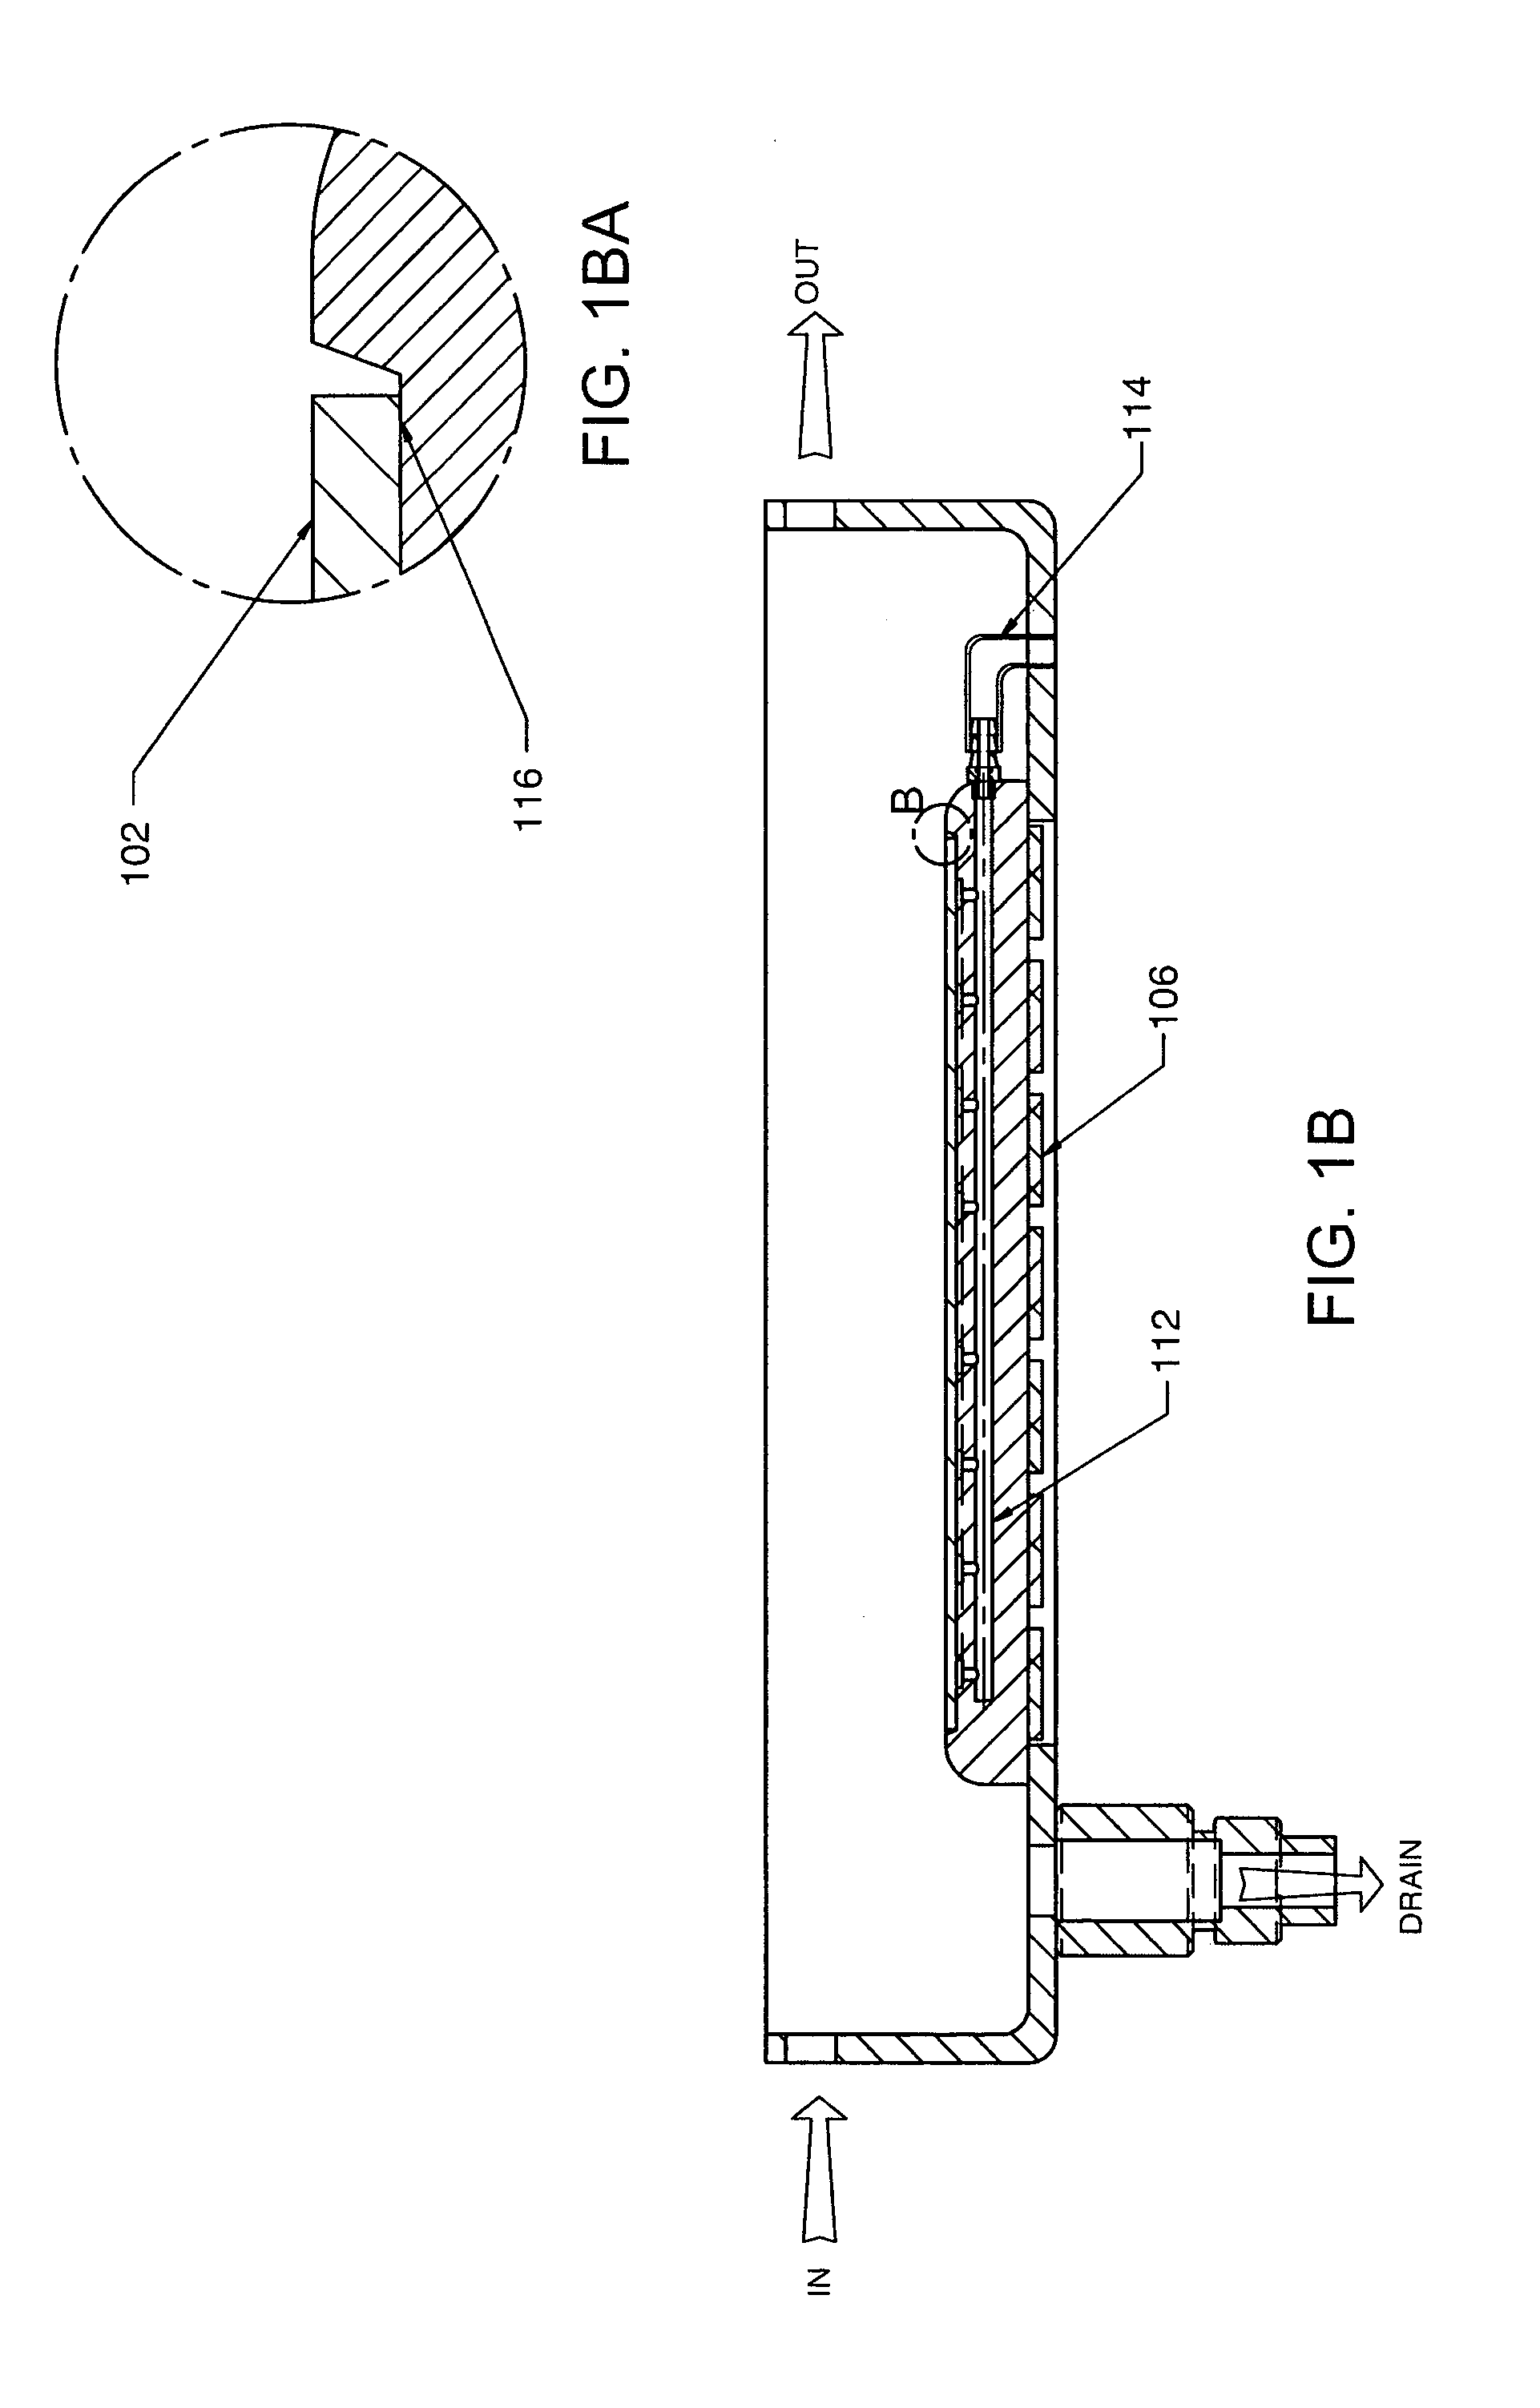 Method and apparatus to process substrates with megasonic energy